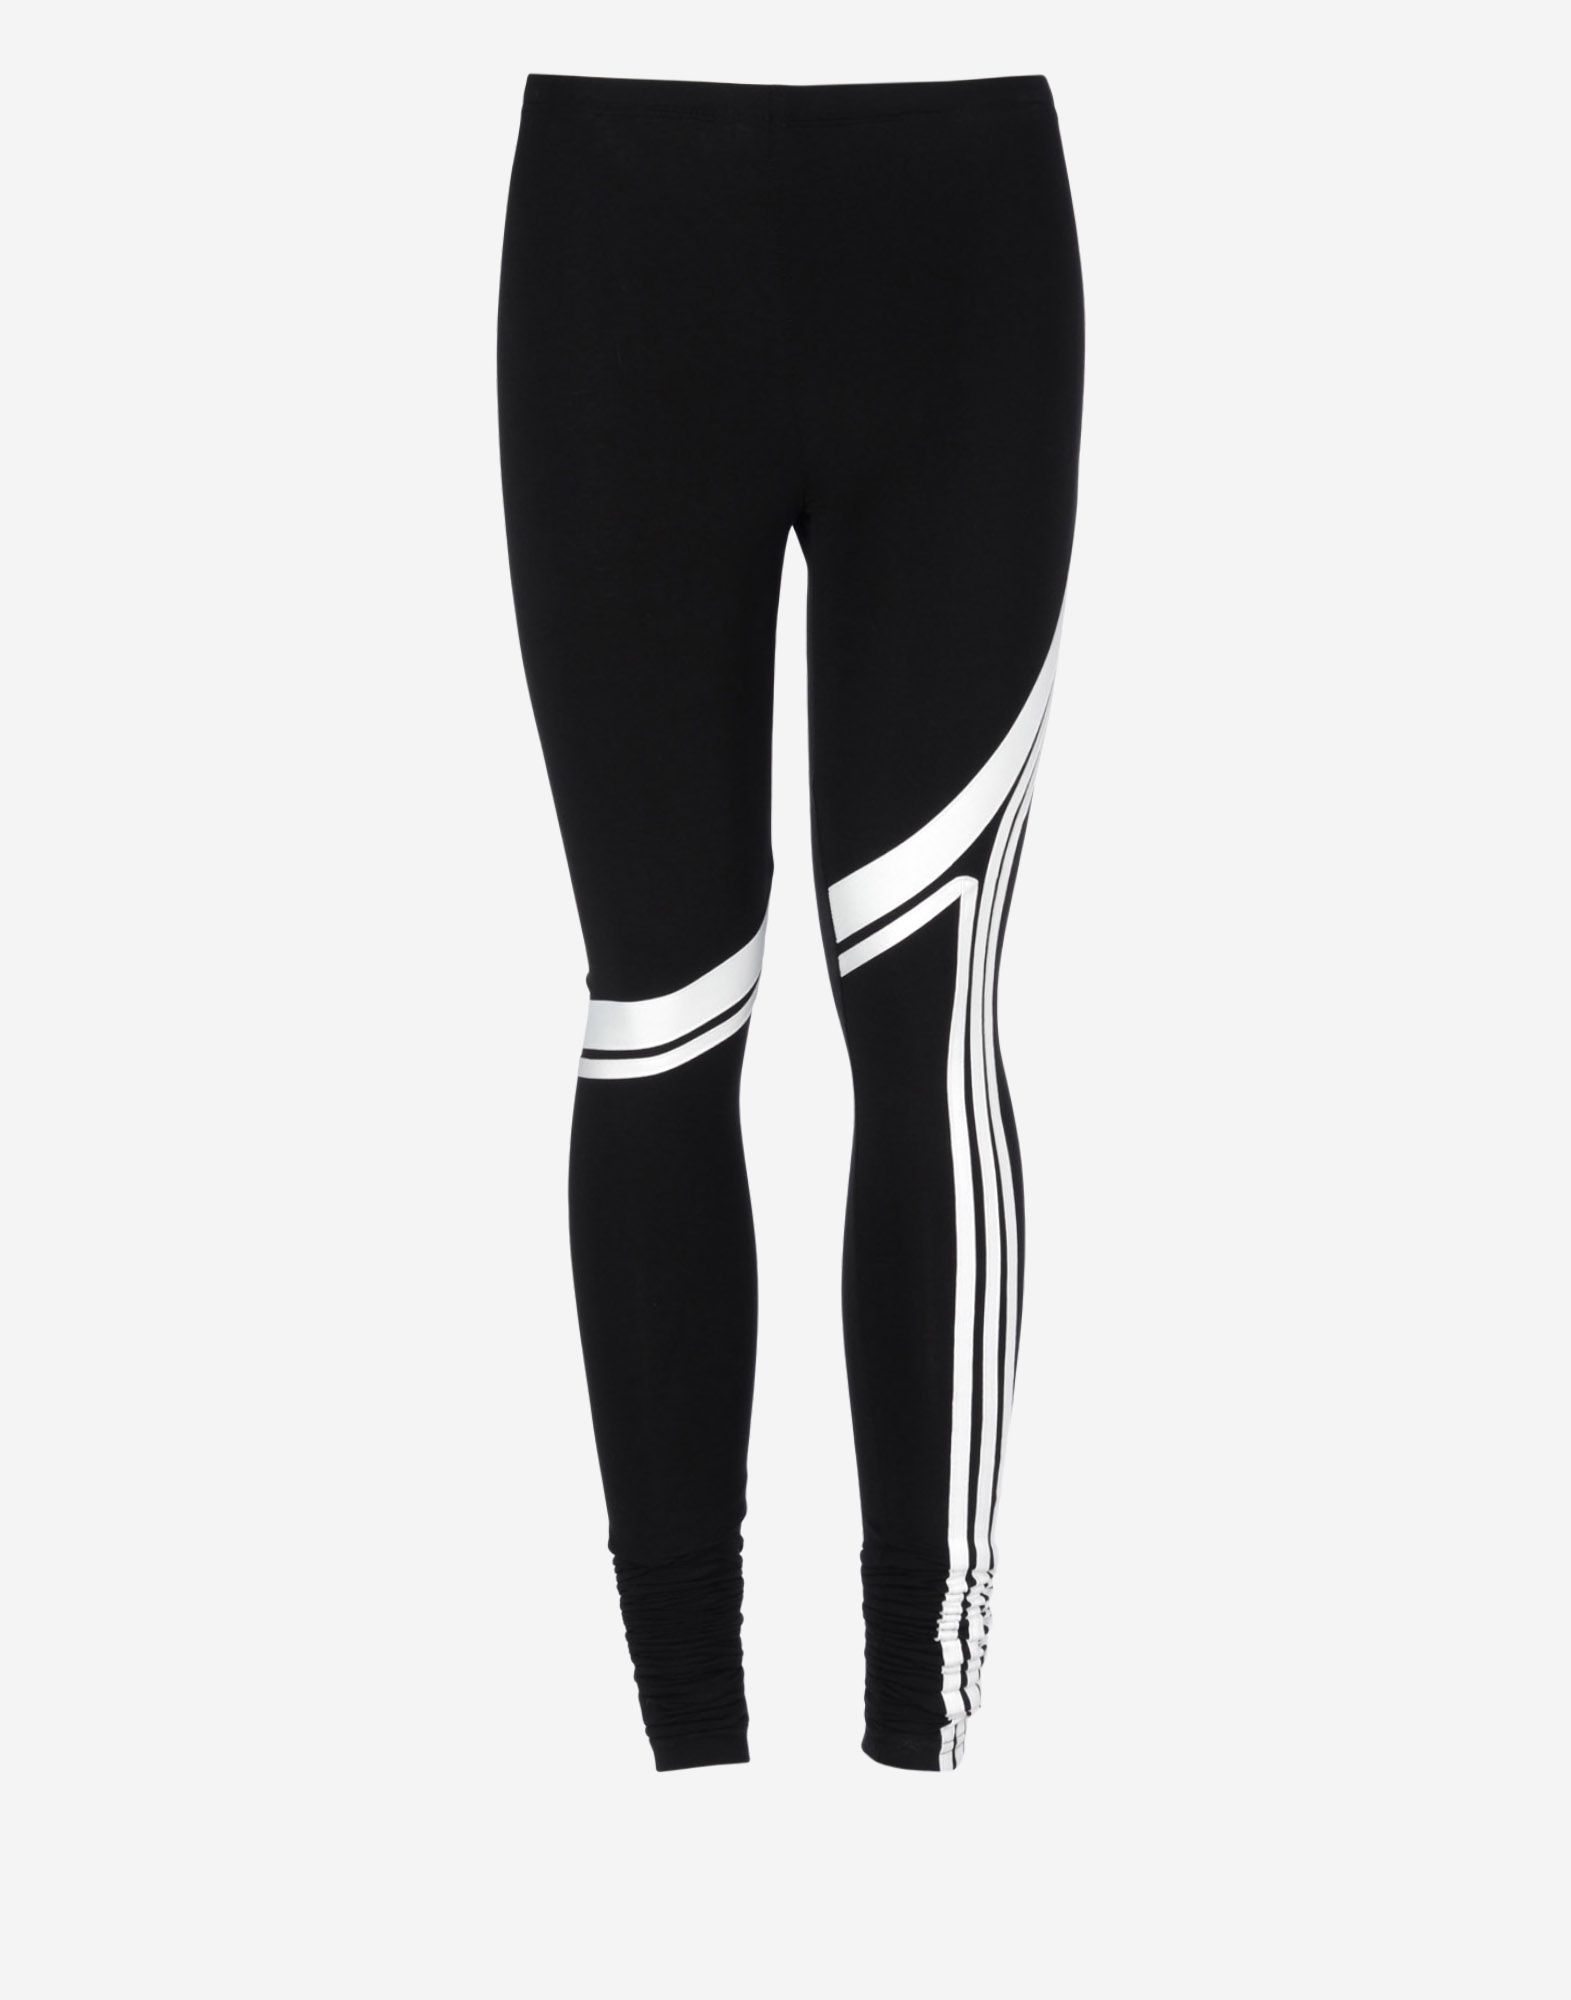 Y 3 Jersey Leggings for Women | Adidas Y-3 Official Store